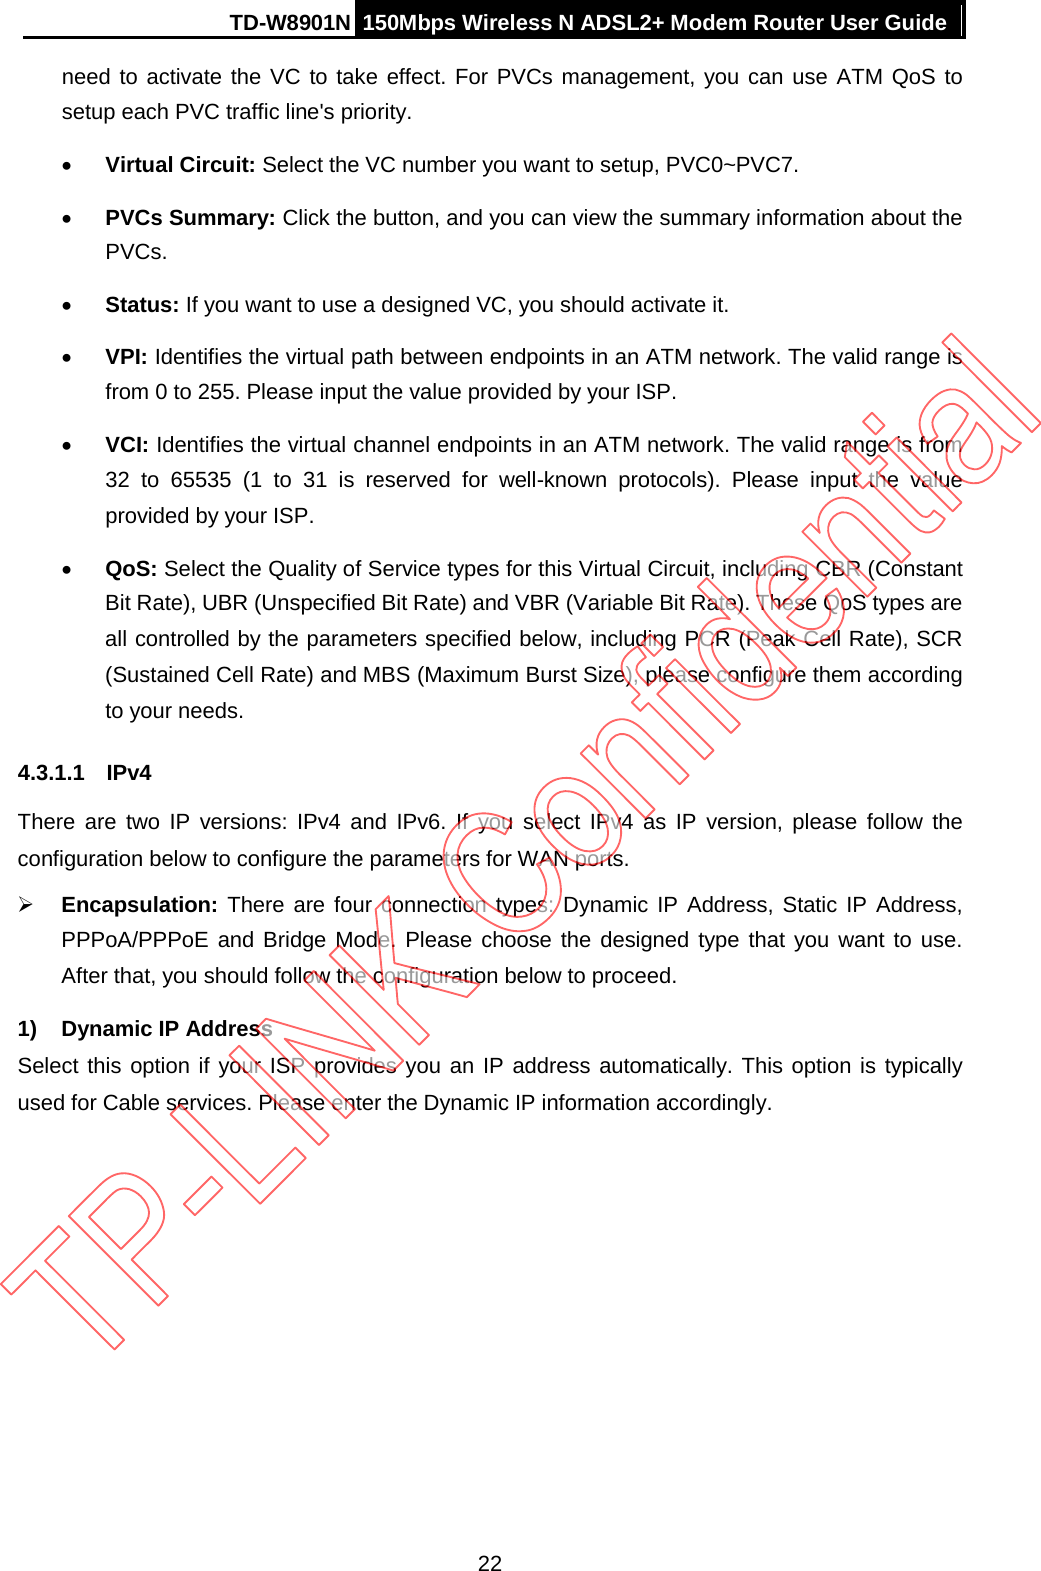 TD-W8901N 150Mbps Wireless N ADSL2+ Modem Router User Guide  need to activate the VC to take effect. For PVCs management, you can use ATM QoS to setup each PVC traffic line&apos;s priority. • Virtual Circuit: Select the VC number you want to setup, PVC0~PVC7. • PVCs Summary: Click the button, and you can view the summary information about the PVCs. • Status: If you want to use a designed VC, you should activate it. • VPI: Identifies the virtual path between endpoints in an ATM network. The valid range is from 0 to 255. Please input the value provided by your ISP. • VCI: Identifies the virtual channel endpoints in an ATM network. The valid range is from 32 to 65535 (1 to 31 is reserved for well-known protocols). Please input the value provided by your ISP. • QoS: Select the Quality of Service types for this Virtual Circuit, including CBR (Constant Bit Rate), UBR (Unspecified Bit Rate) and VBR (Variable Bit Rate). These QoS types are all controlled by the parameters specified below, including PCR (Peak Cell Rate), SCR (Sustained Cell Rate) and MBS (Maximum Burst Size), please configure them according to your needs. 4.3.1.1 IPv4 There are two IP versions: IPv4 and IPv6. If you select IPv4 as IP version, please follow the configuration below to configure the parameters for WAN ports.  Encapsulation: There are four connection types: Dynamic IP Address, Static IP Address, PPPoA/PPPoE and Bridge Mode. Please choose the designed type that you want to use. After that, you should follow the configuration below to proceed. 1) Dynamic IP Address Select this option if your ISP provides you an IP address automatically. This option is typically used for Cable services. Please enter the Dynamic IP information accordingly.   22 